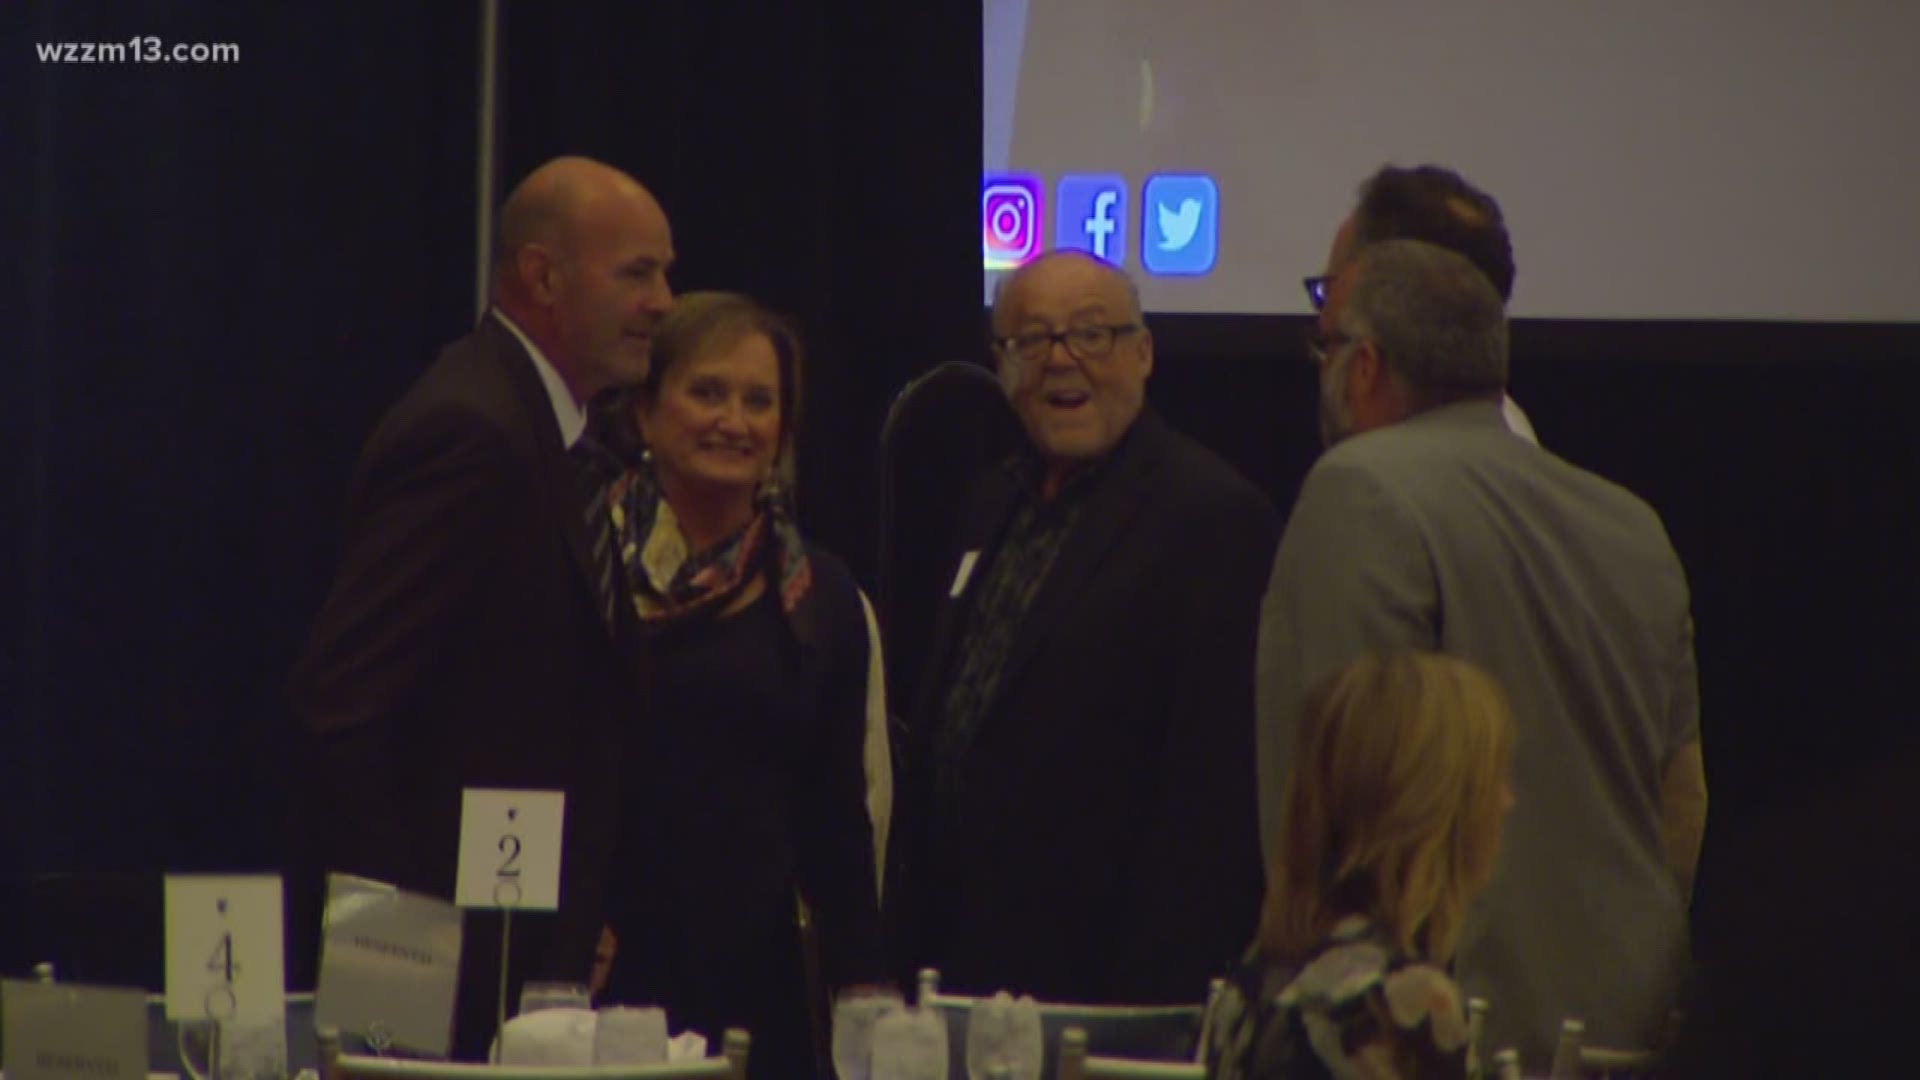 Former Detroit Tigers player spoke at Economic Club of Grand Rapids